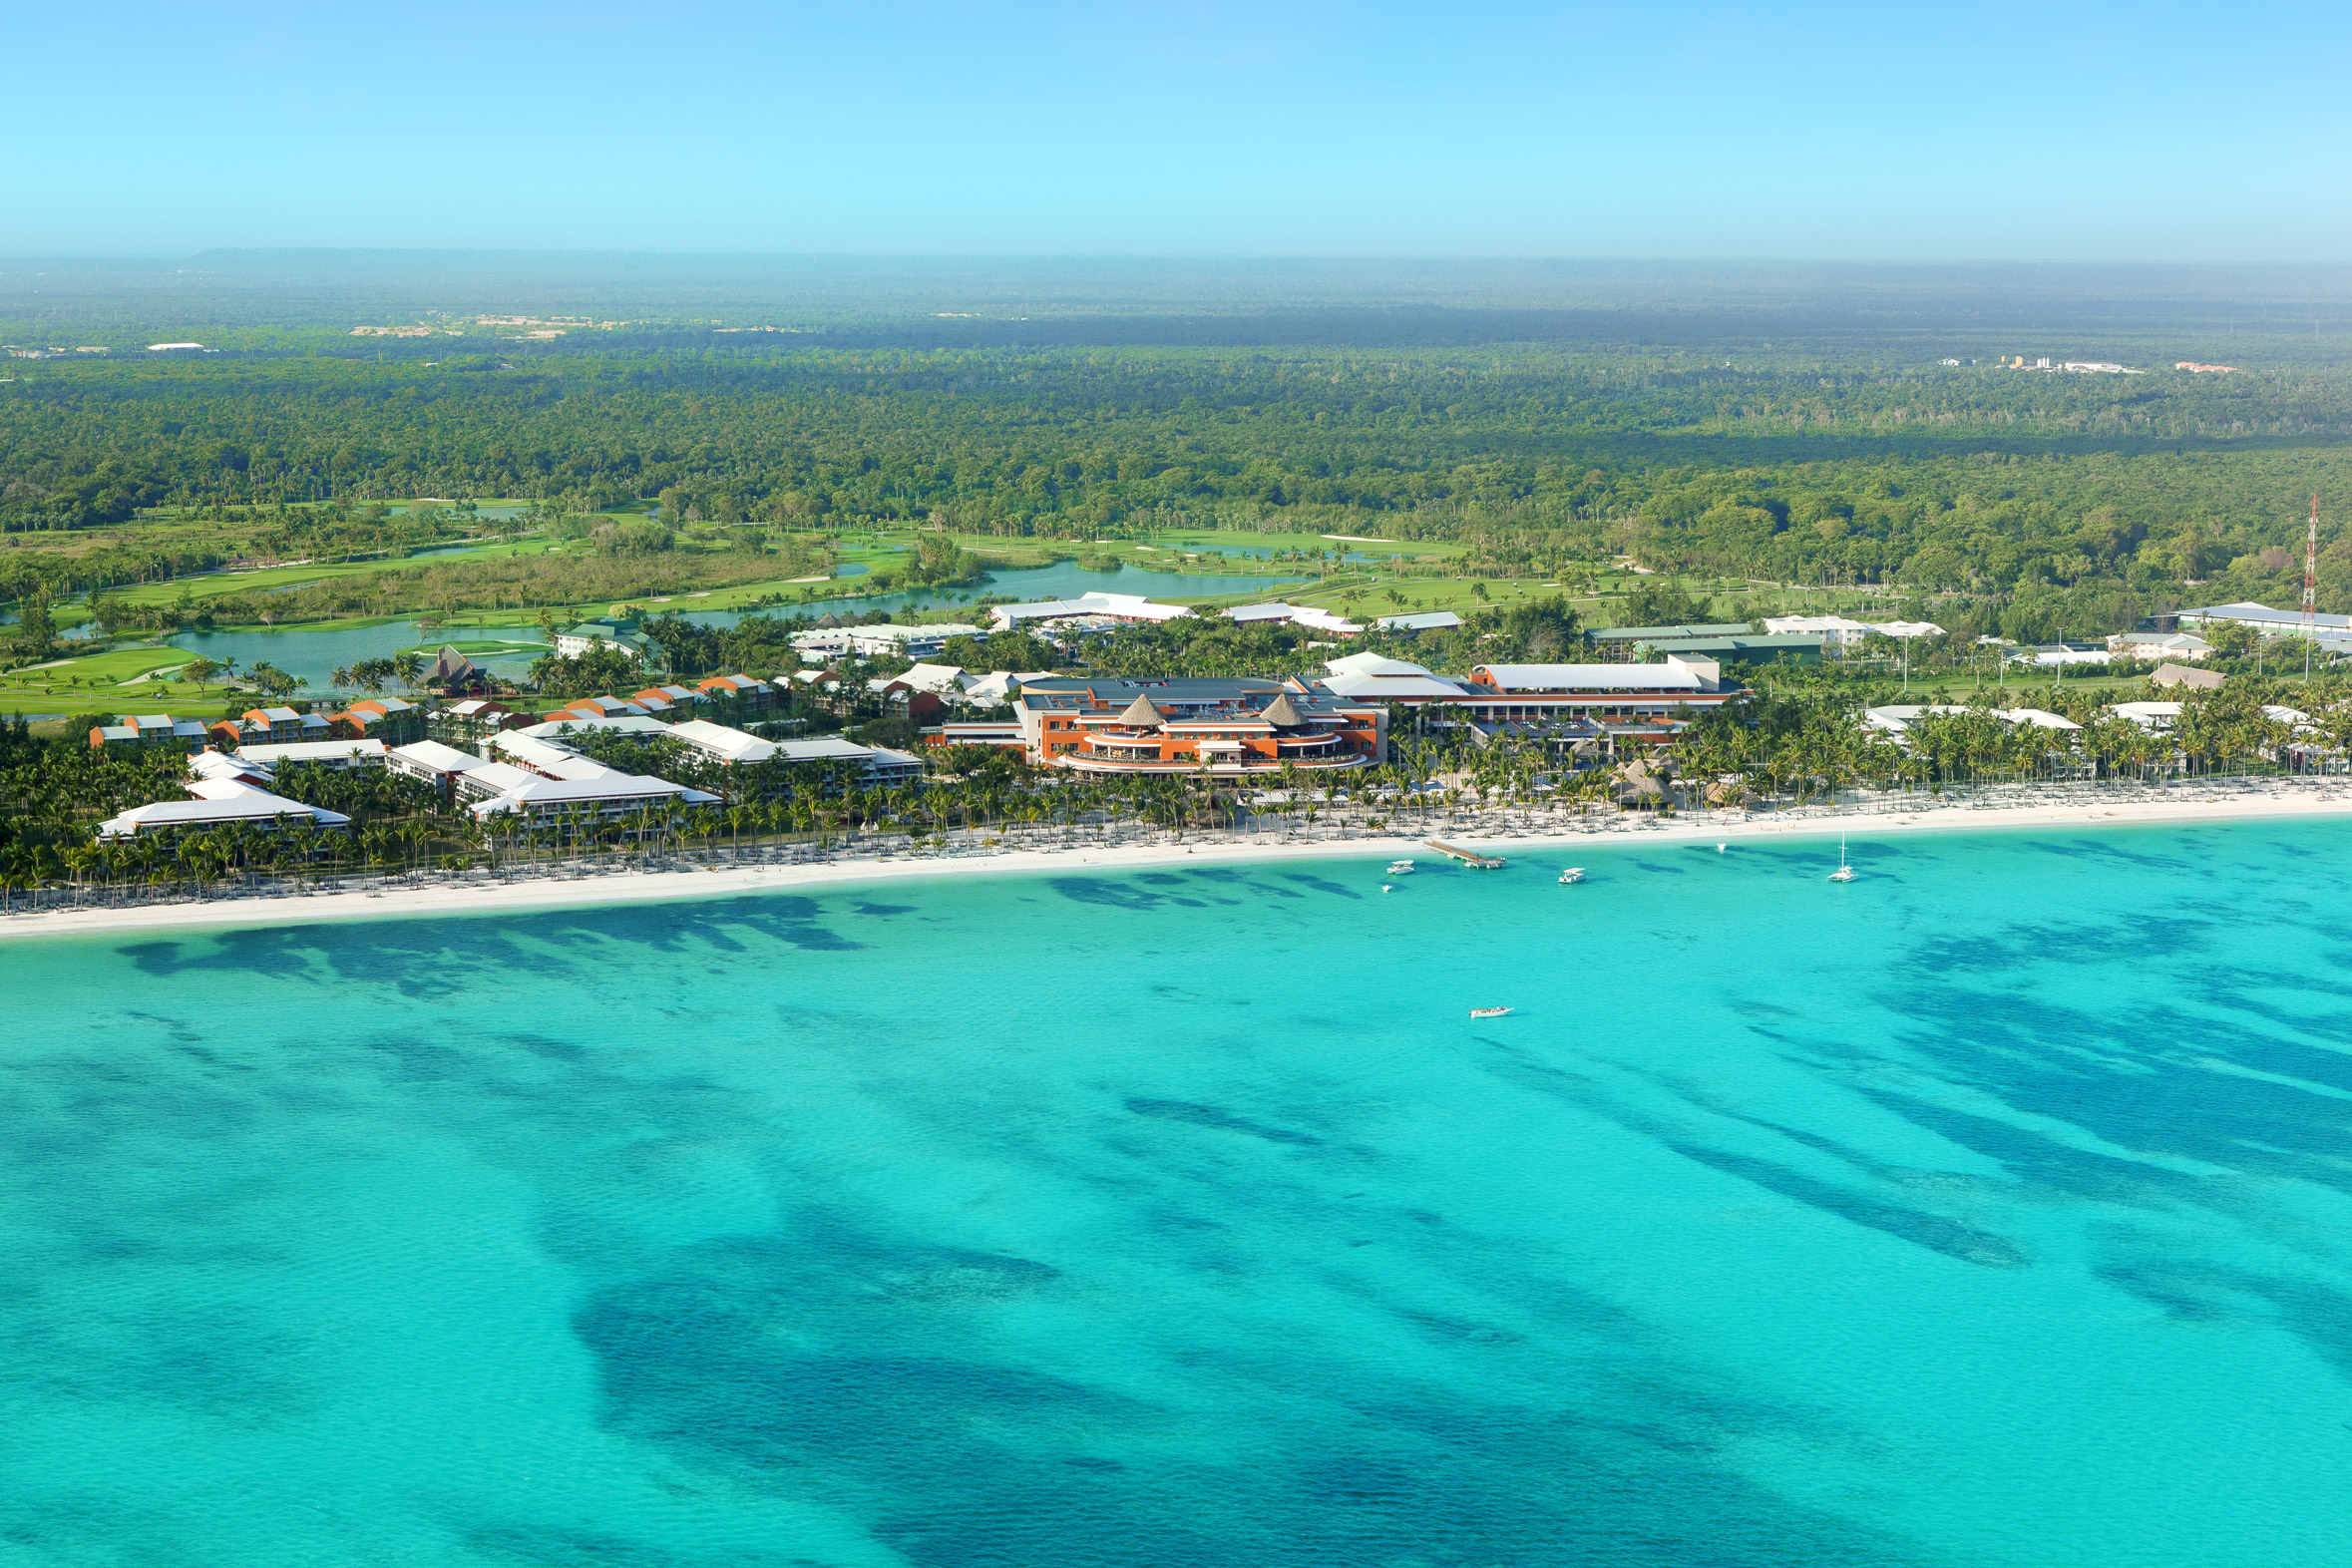 Activities and excursions - Barcelo Bavaro Palace - Transat